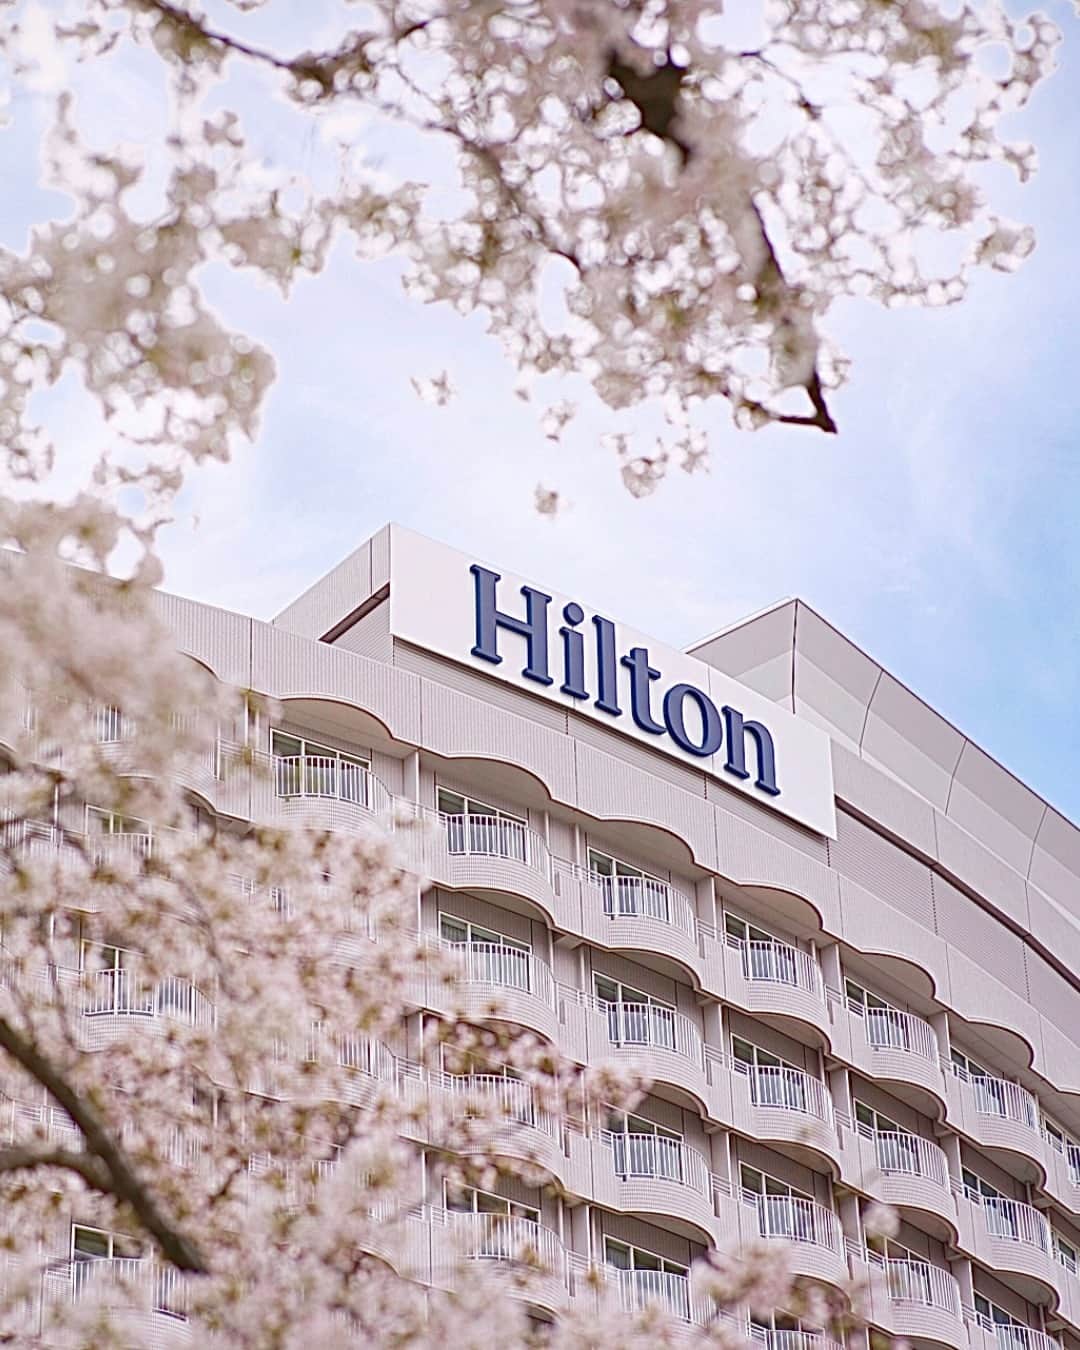 Hilton Tokyo Odaiba ヒルトン東京お台場のインスタグラム：「心地よい風を感じる爽やかなお台場にも、桜シーズンが到来です🌸  ヒルトン東京お台場の客室から桜を眺めたり、「シースケープ スイーツ&コーヒー」をテイクアウトしてお花見など、この時期だけの絶景をご堪能ください。  Take a deep breath and be inspired by the beauty of this fleeting moment - cherry blossom season has arrived in Odaiba, embrace it with open arms.  Enjoy the stunning views from your room at Hilton Tokyo Odaiba, or take out some Seascape Sweets & Coffee for a relaxing snack whilst viewing the blossoms🌸   #ヒルトン東京お台場 #hiltontokyoodaiba」